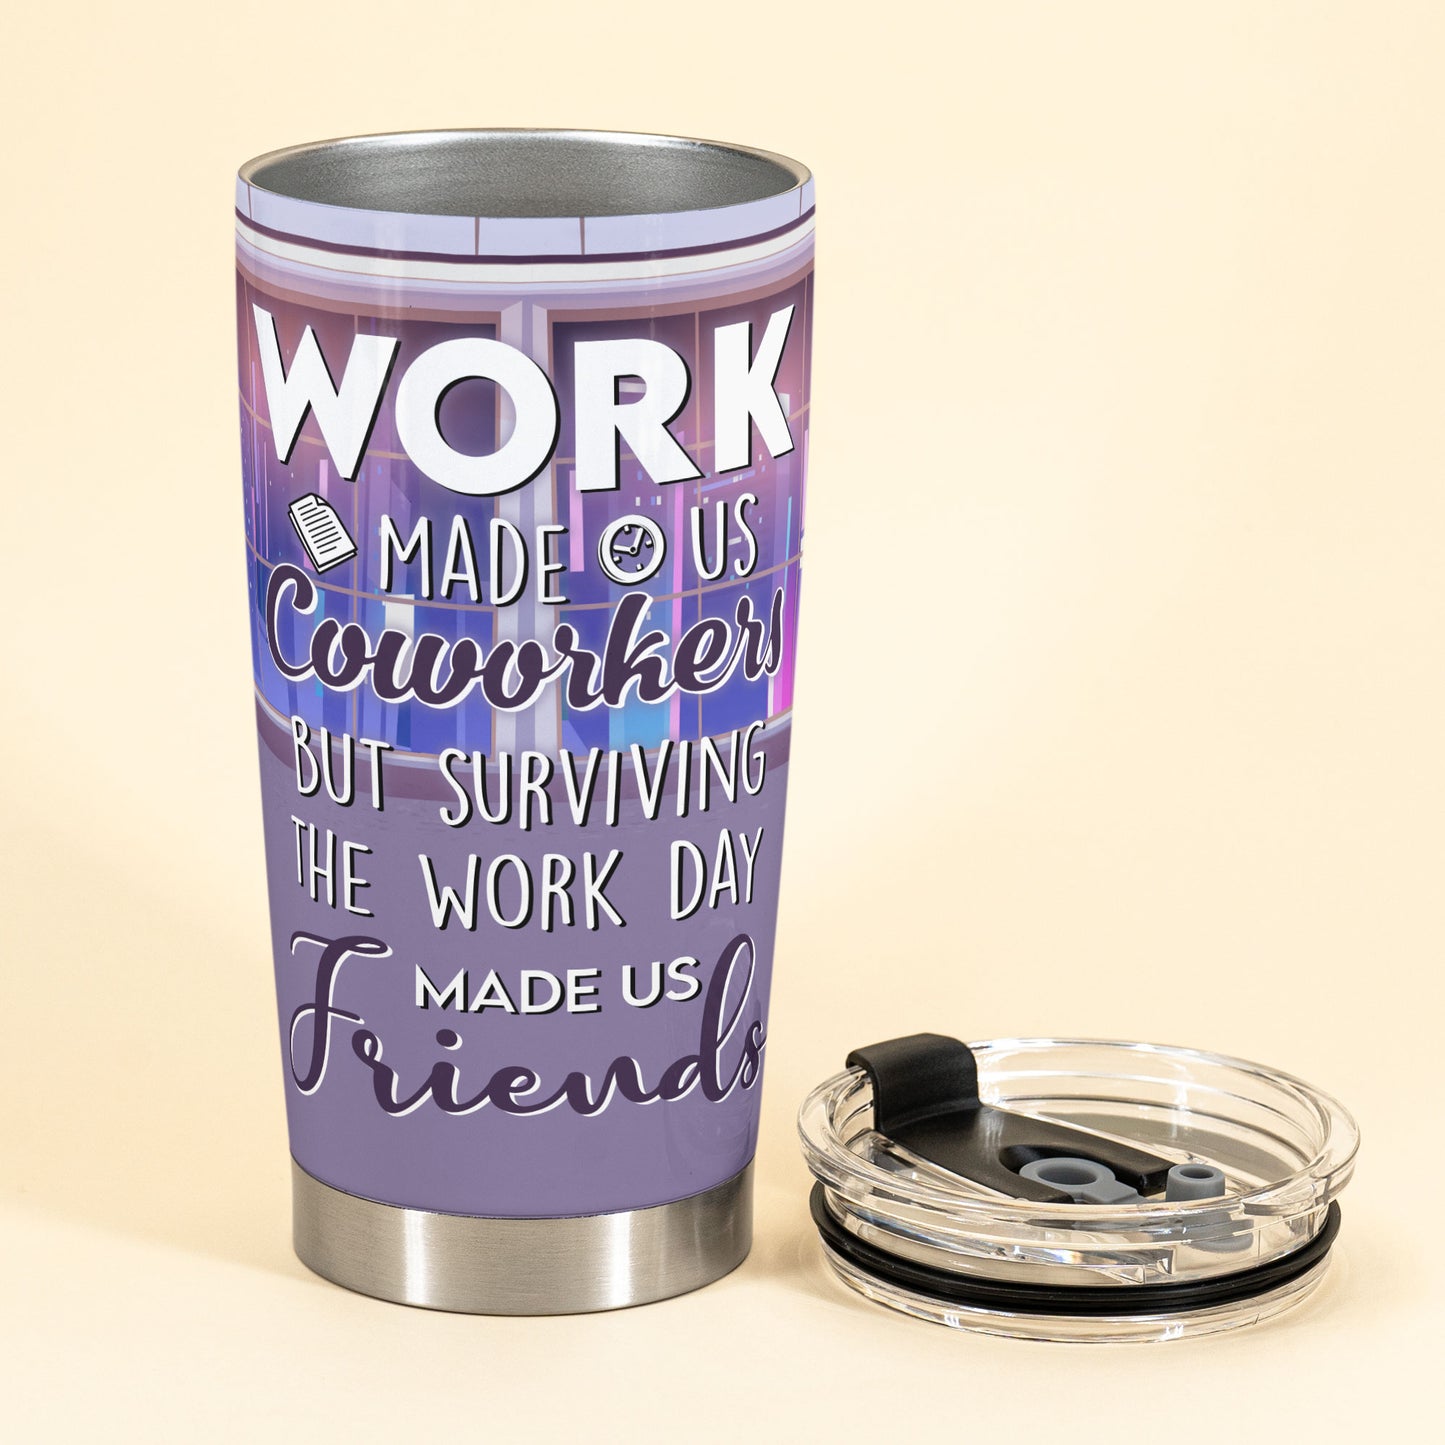 Surviving The Work Day Made Us Friends - Personalized Tumbler Cup - Birthday, Funny Gift For Colleagues, Employees, Friends